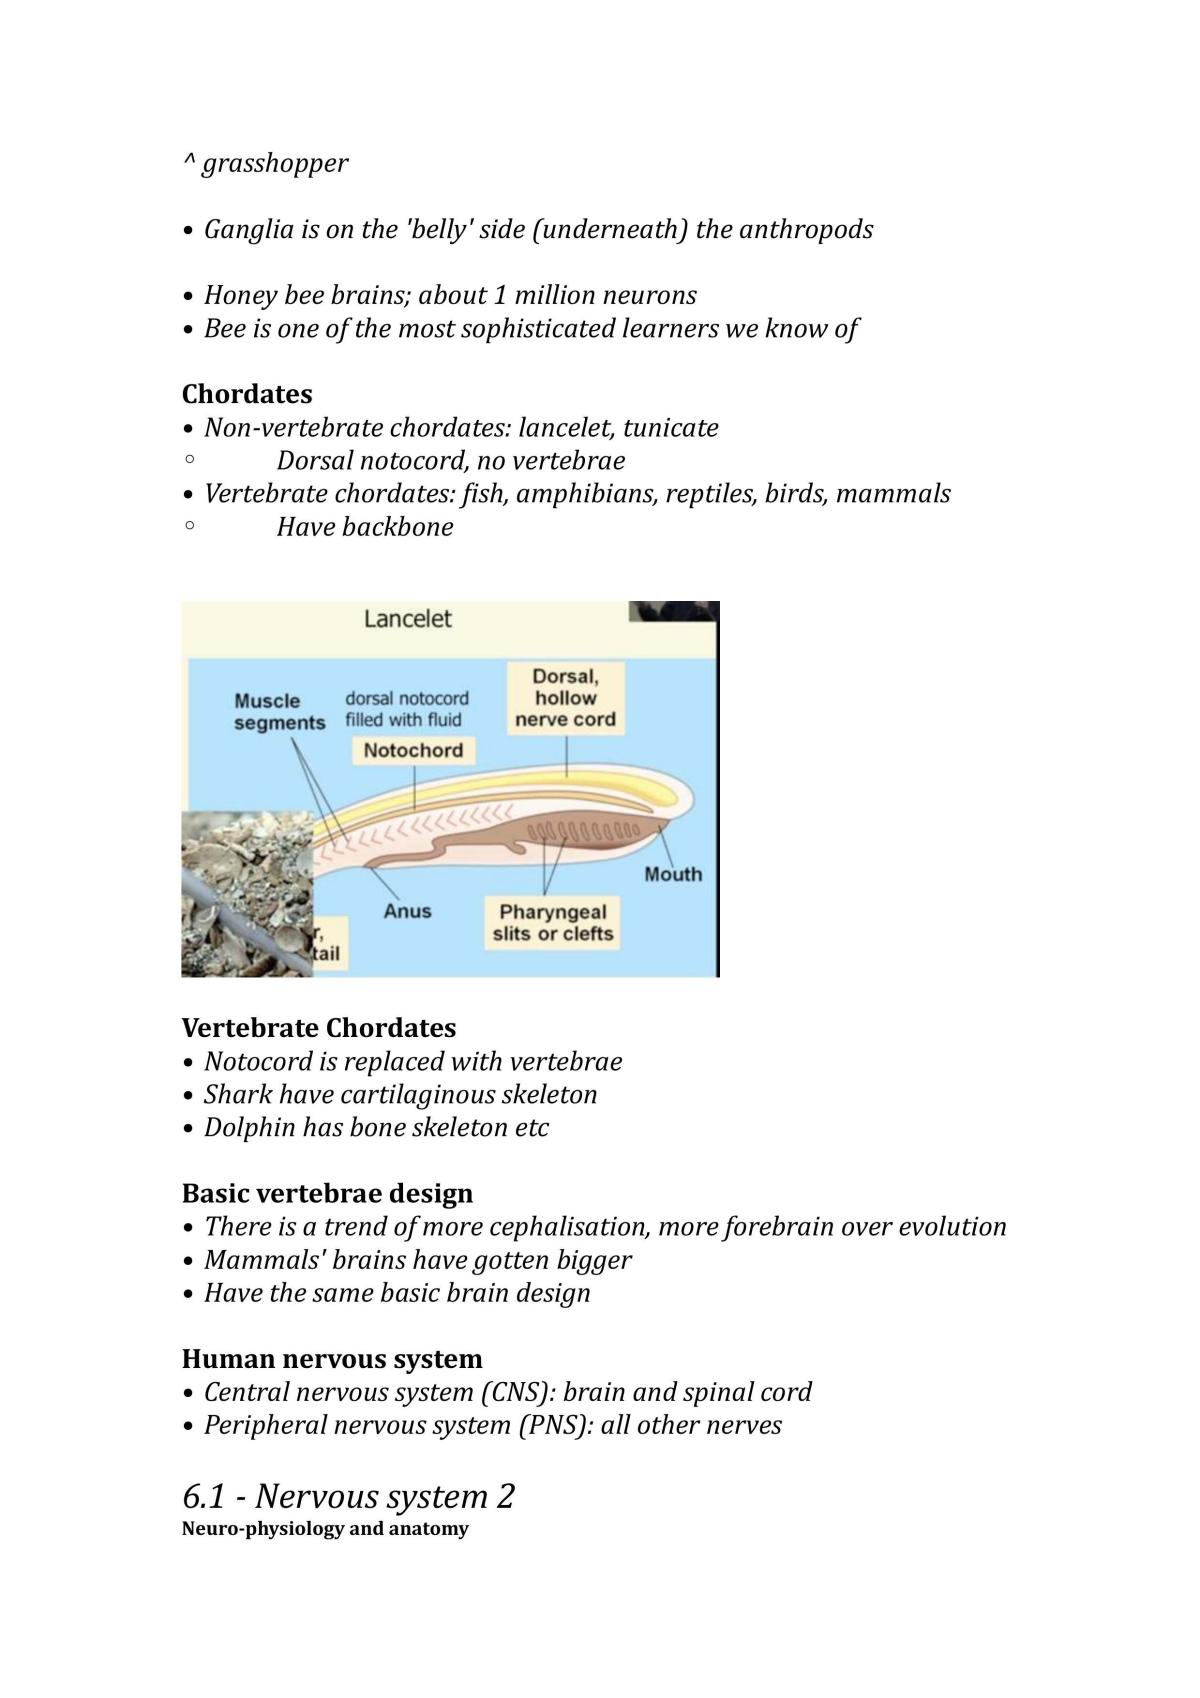 Biological Basis of Behaviour Study Guide - Page 26